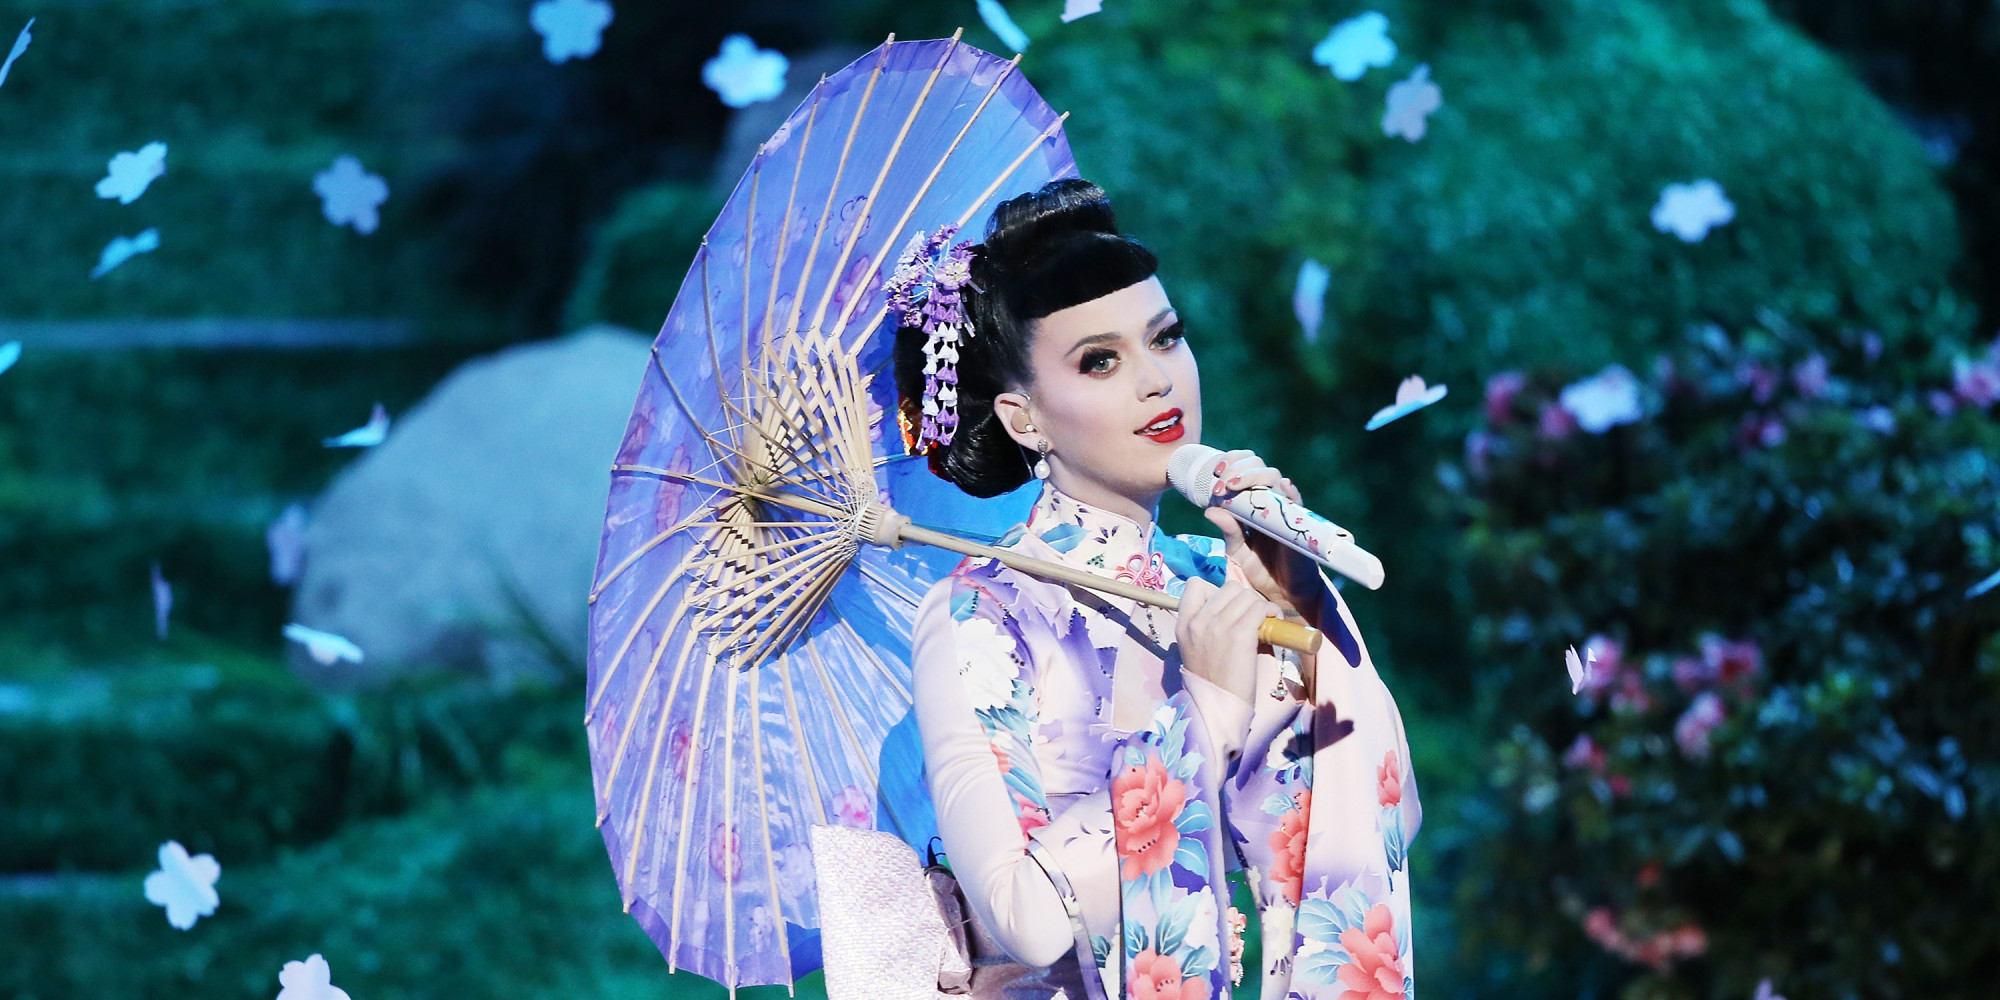 Download this Katy Perry Facebook picture